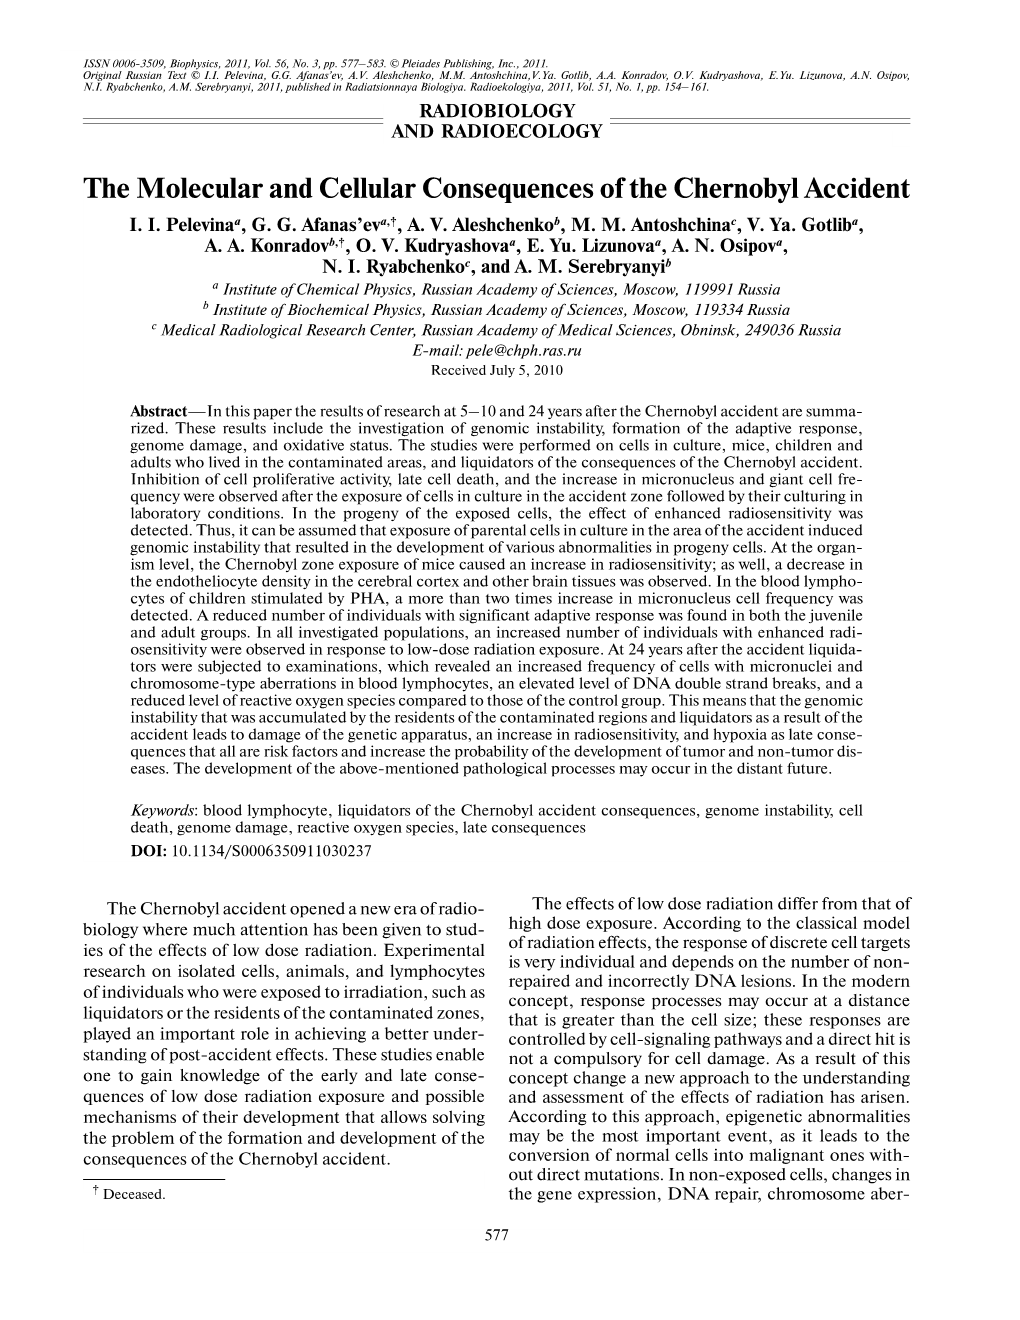 The Molecular and Cellular Consequences of the Chernobyl Accident I